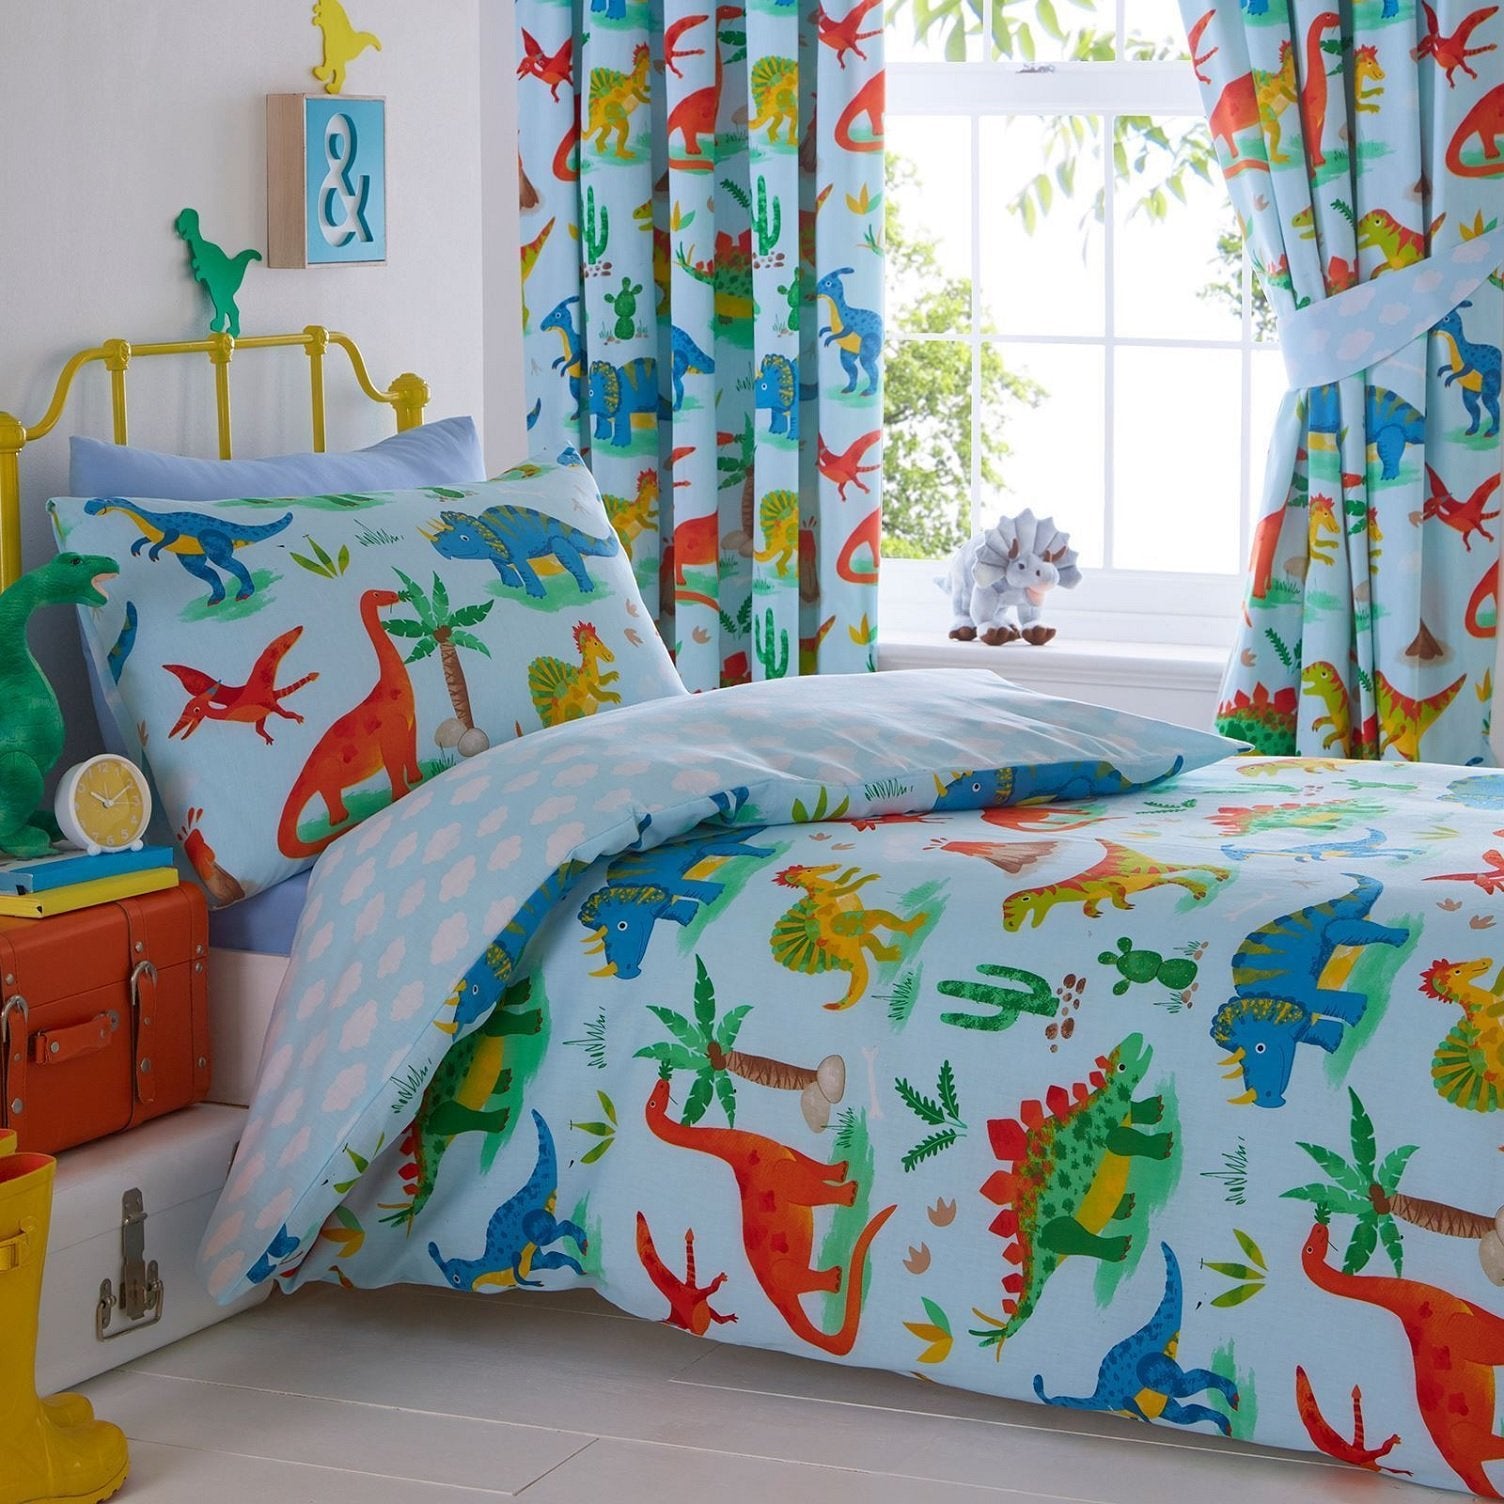 "Kids Club Dinosaurs Bed Duvet Cover and Pillowcase Set, Polyester-Cotton, Blue, Single,".